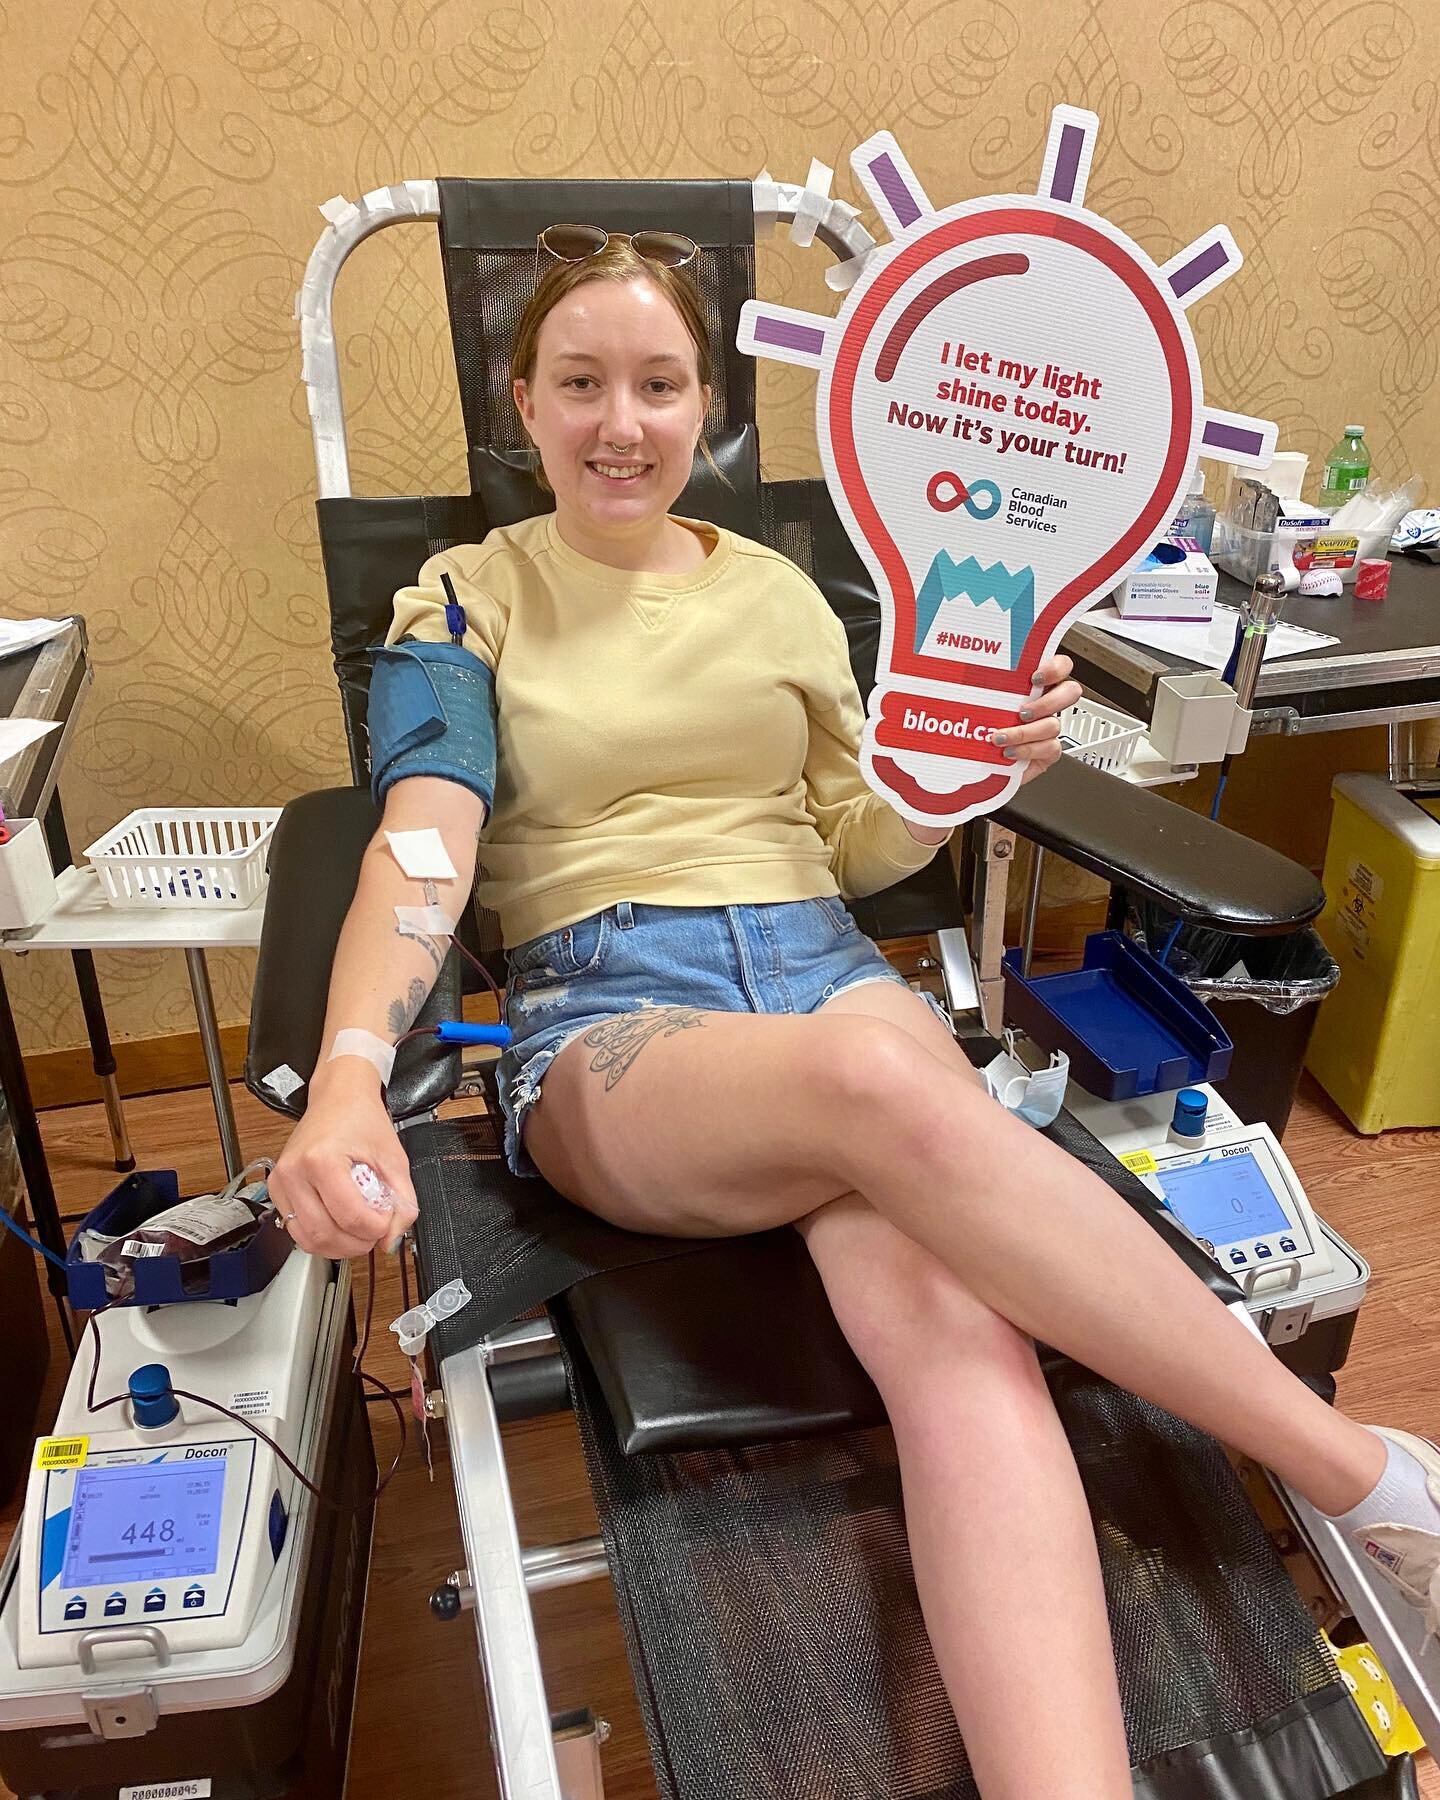 ✨ 30 Day Challenge - Donate Blood ✨

National Blood Donor Week is June 12 - 18. 100,000 new donors are needed this year, so if you can sign yourself up to donate or just share this post to encourage others, it would be a great help in getting @canada